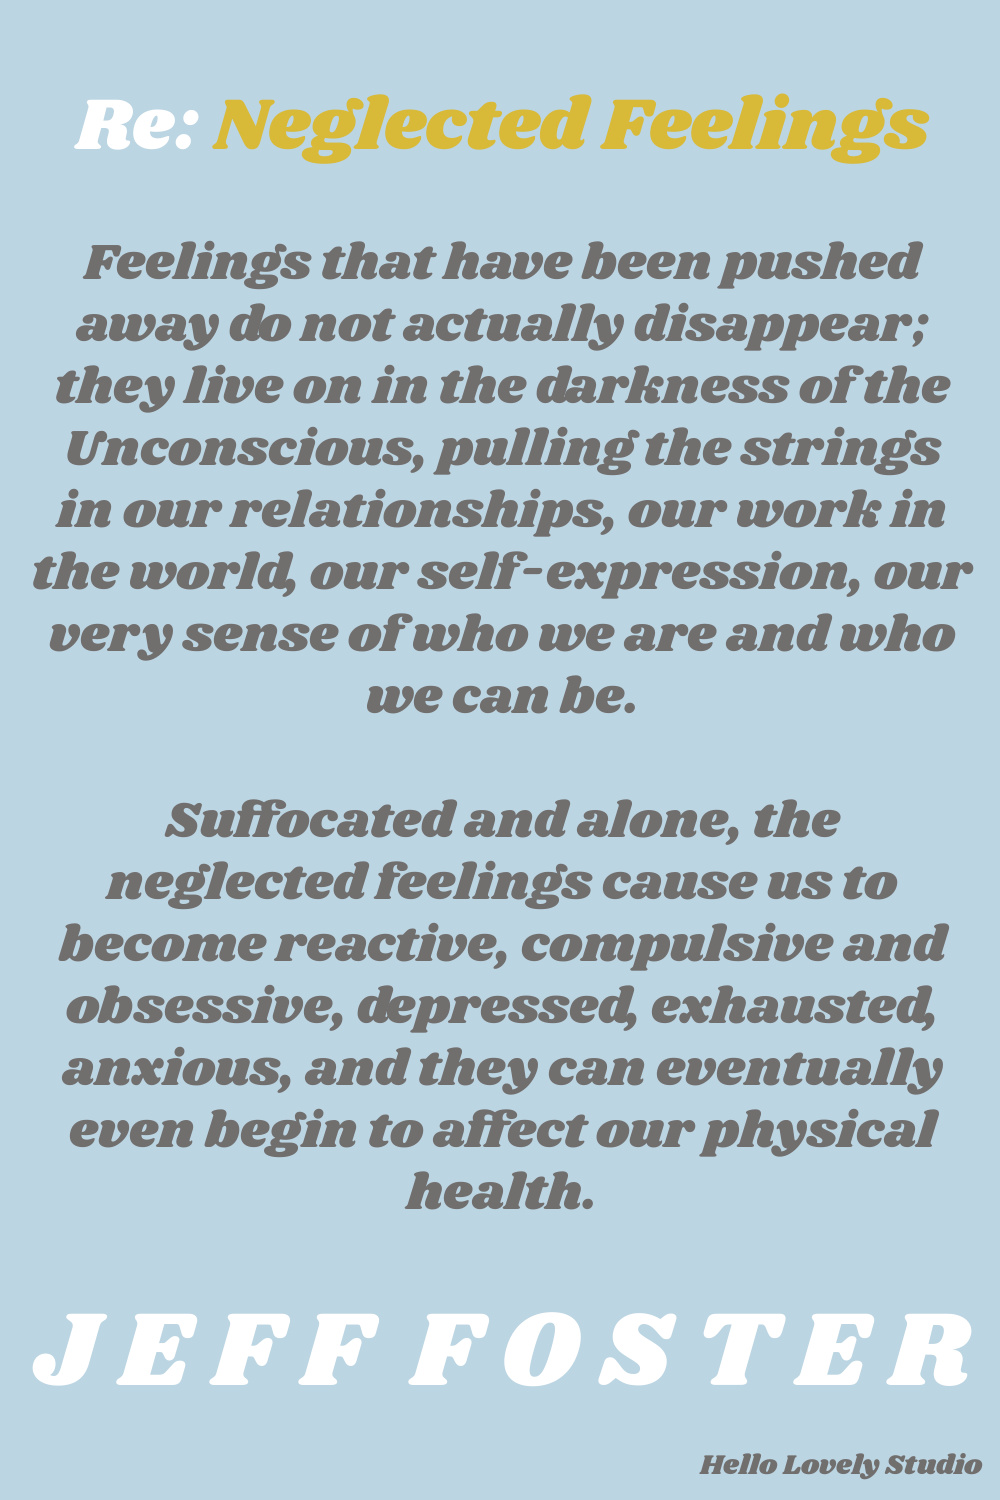 Jeff Foster quote about neglected feelings on Hello Lovely Studio. #spiritualityquotes #spiritualjourneyquotes #contemplativequotes